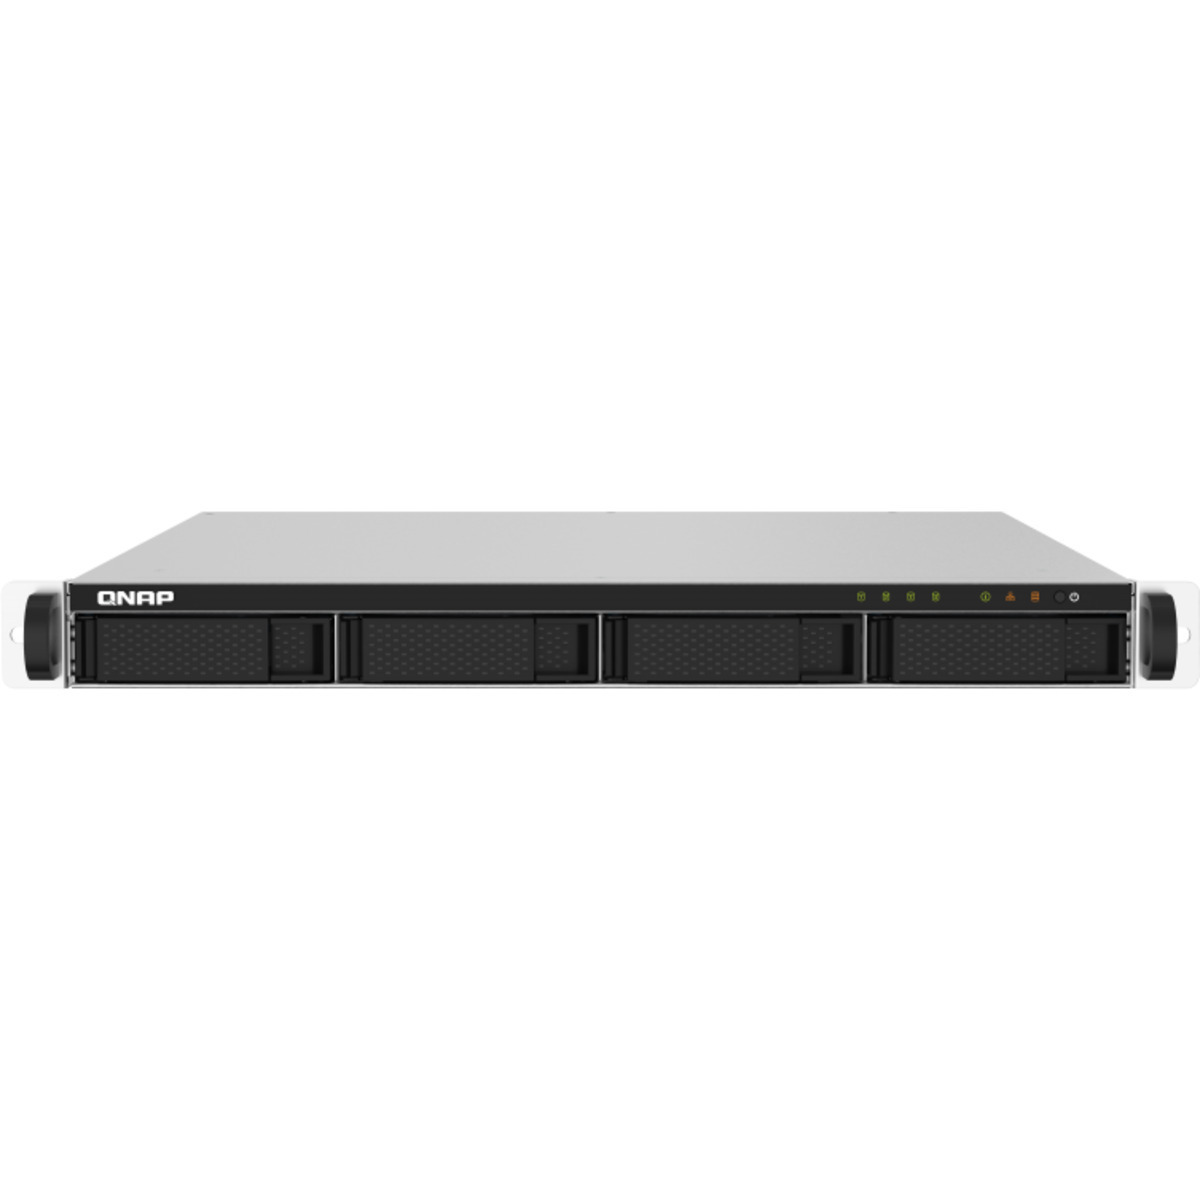 QNAP TS-432PXU 16tb 4-Bay RackMount Personal / Basic Home / Small Office NAS - Network Attached Storage Device 2x8tb Seagate IronWolf ST8000VN004 3.5 7200rpm SATA 6Gb/s HDD NAS Class Drives Installed - Burn-In Tested - FREE RAM UPGRADE TS-432PXU